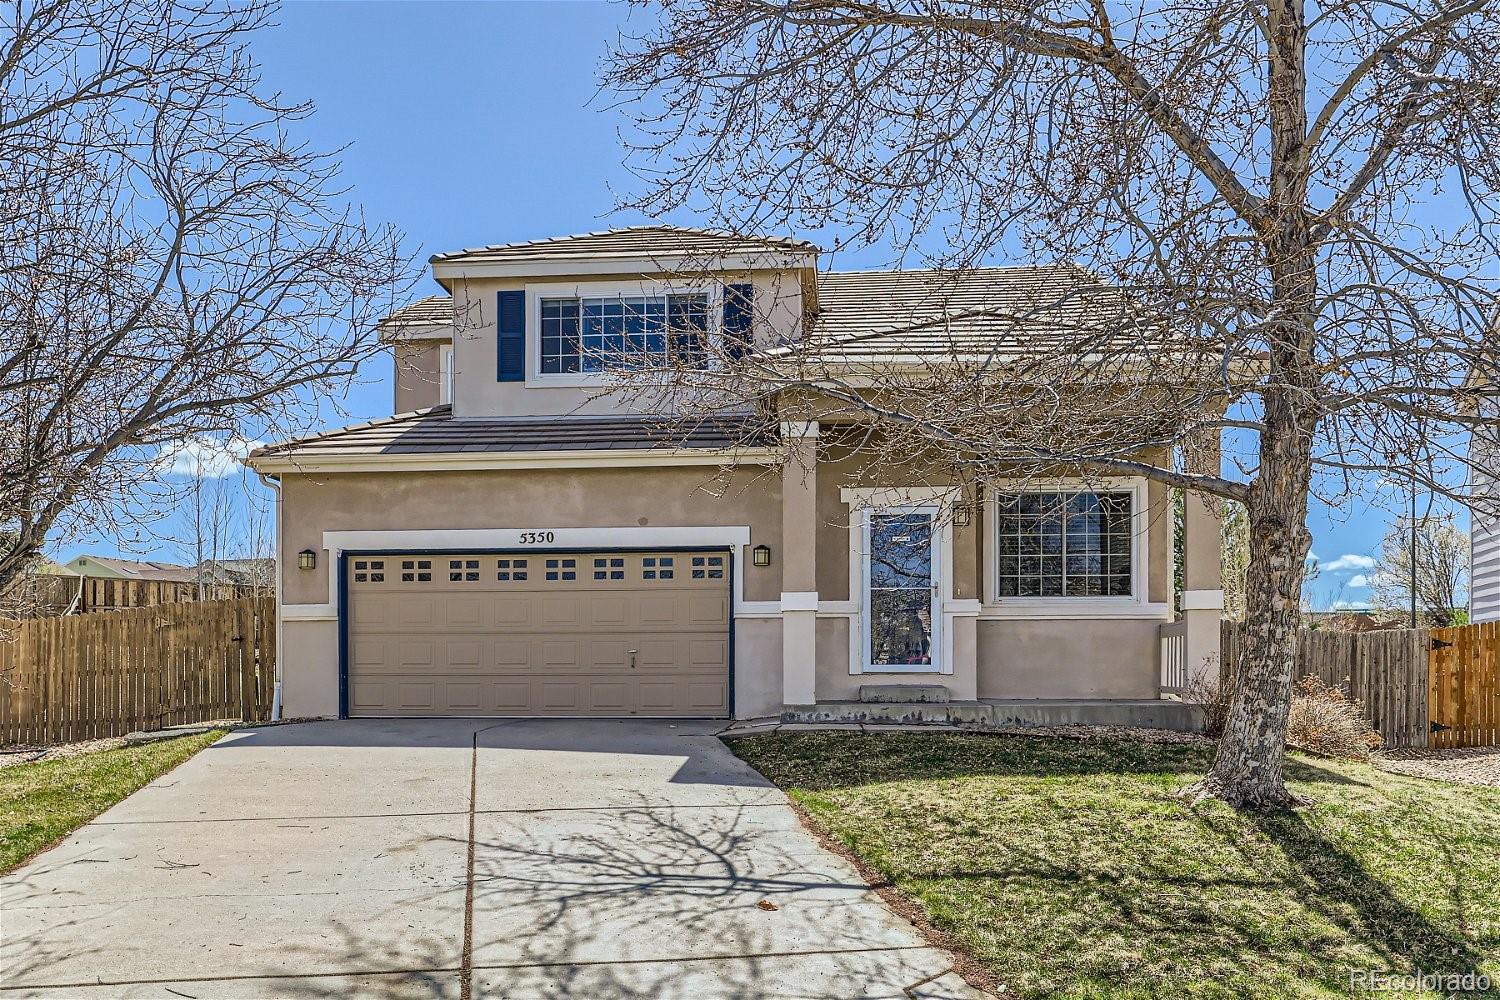 5350 s sicily way, Aurora sold home. Closed on 2024-05-22 for $537,500.